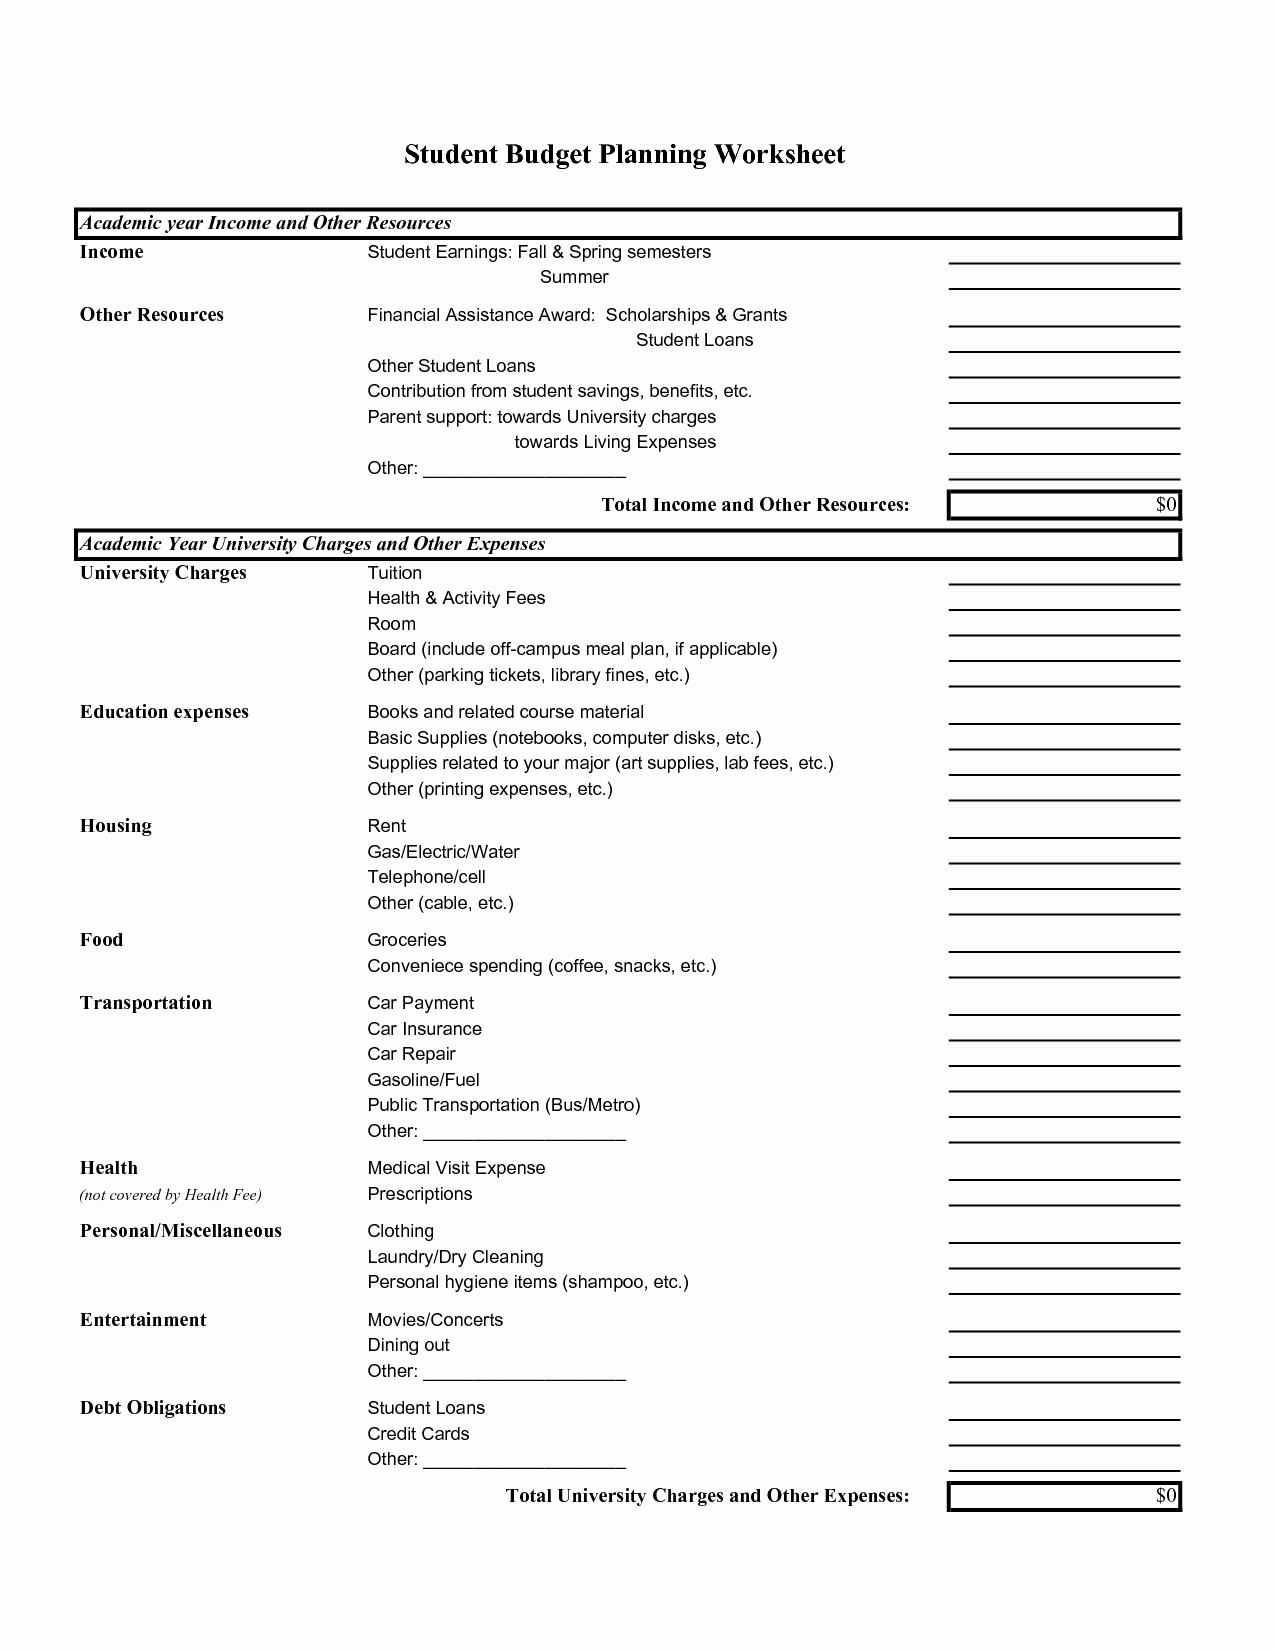 Budgeting Worksheet for College Students Lovely 14 Best Of Personal Bud Plan Worksheet 6 Month